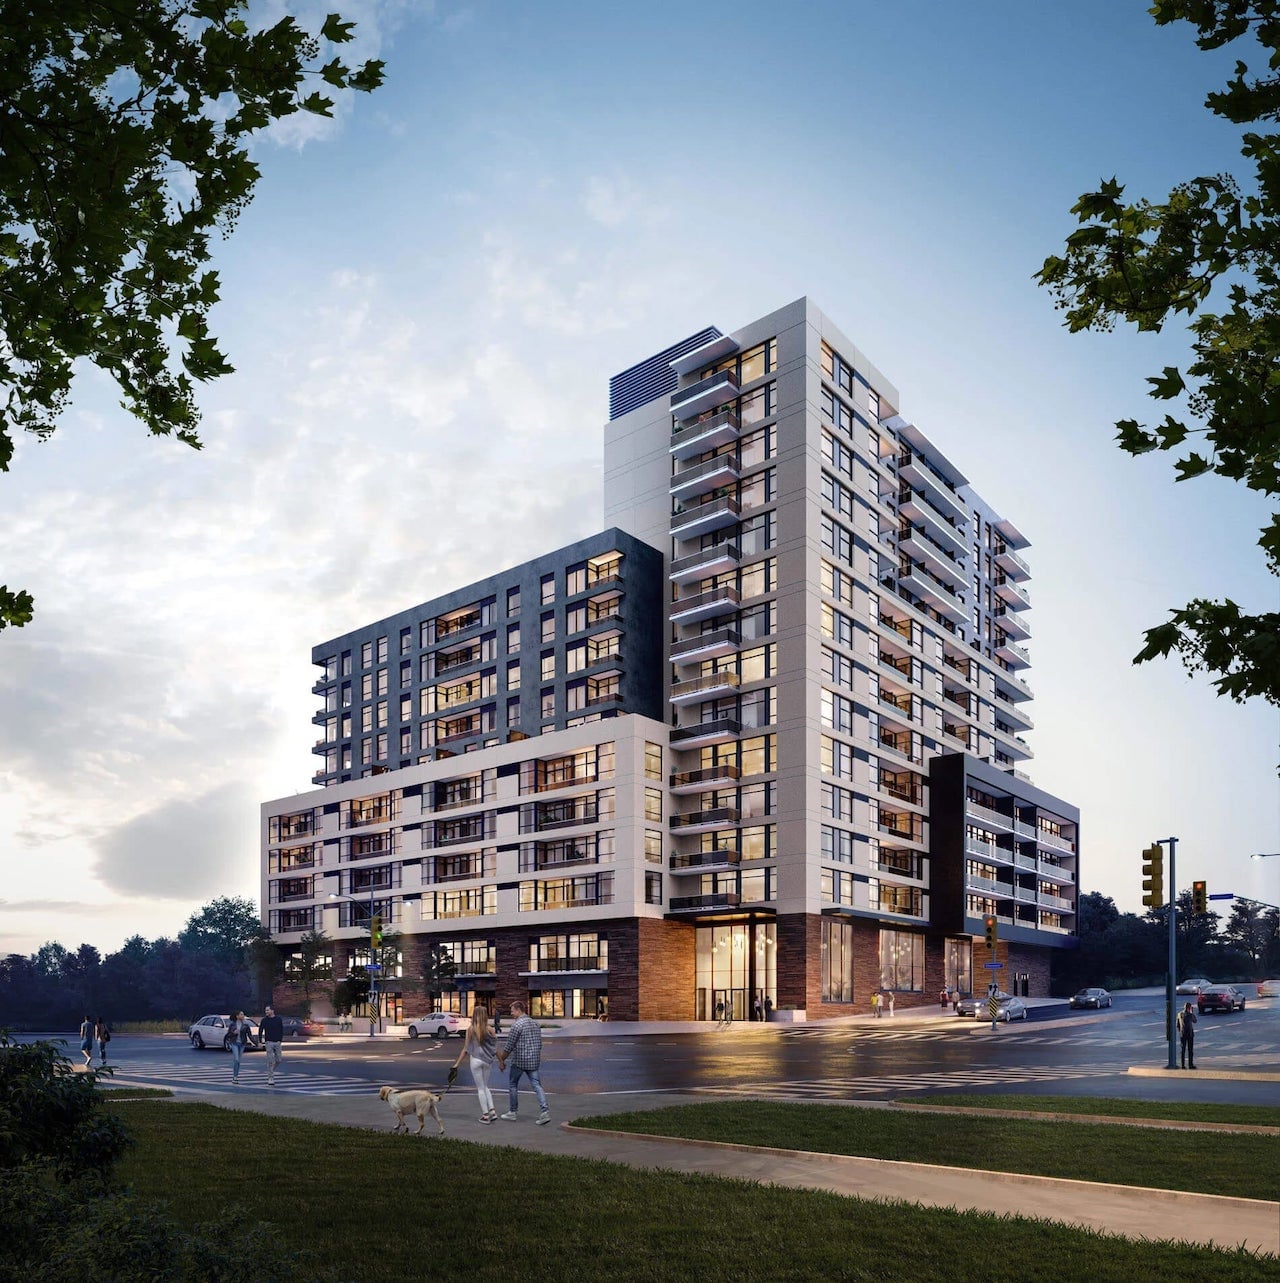 Rendering of ELLE Condos exterior full view in the evening